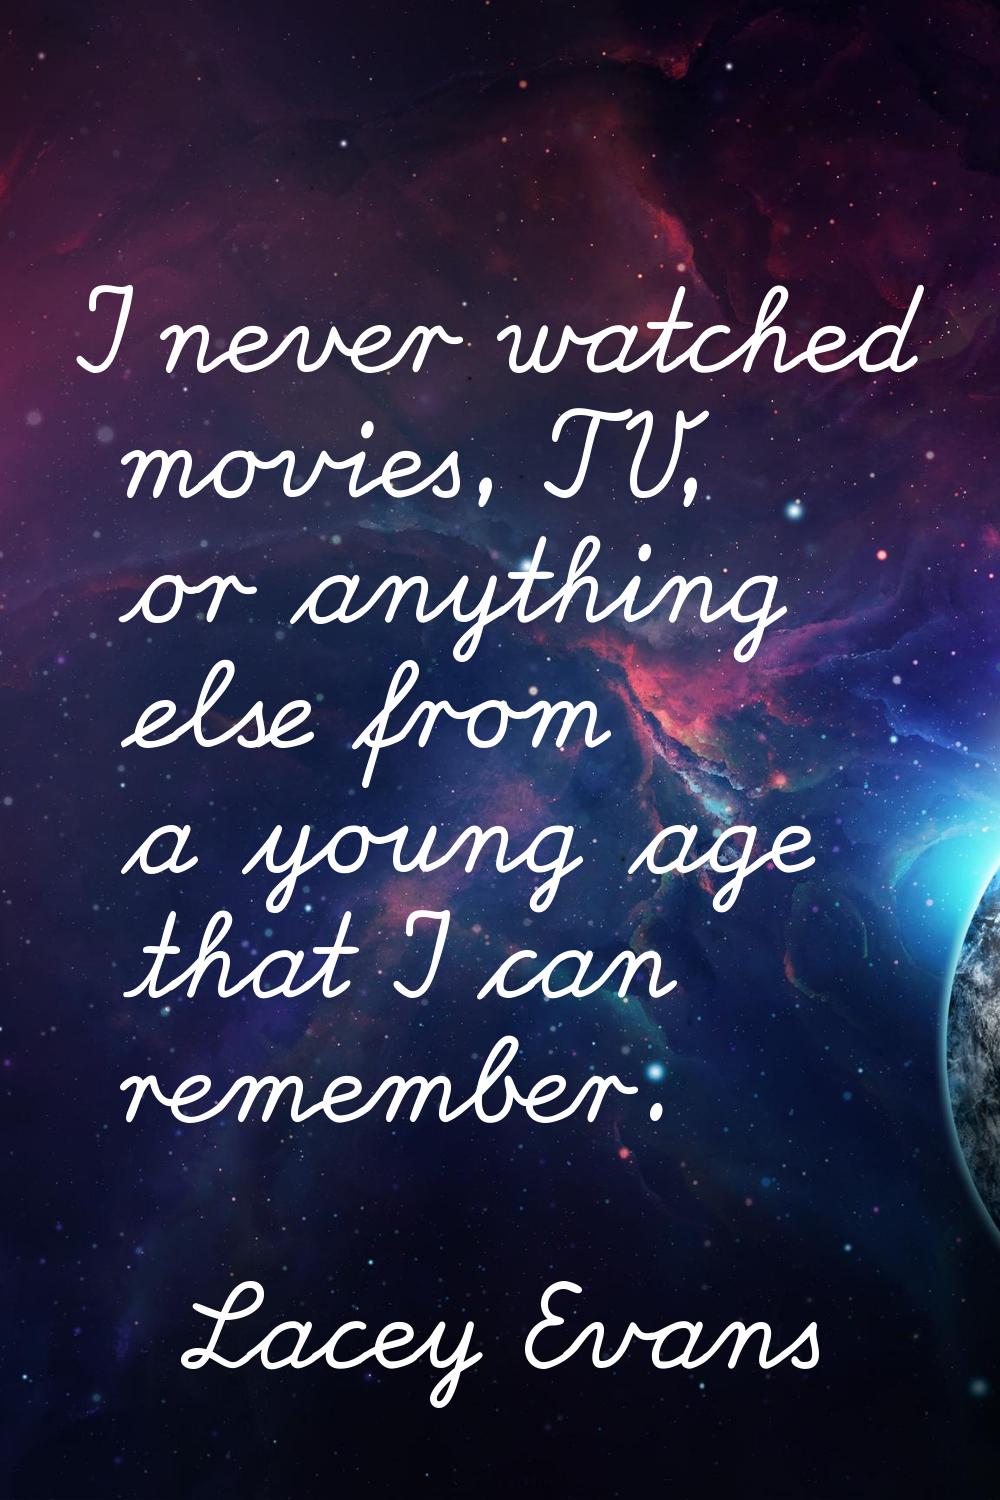 I never watched movies, TV, or anything else from a young age that I can remember.